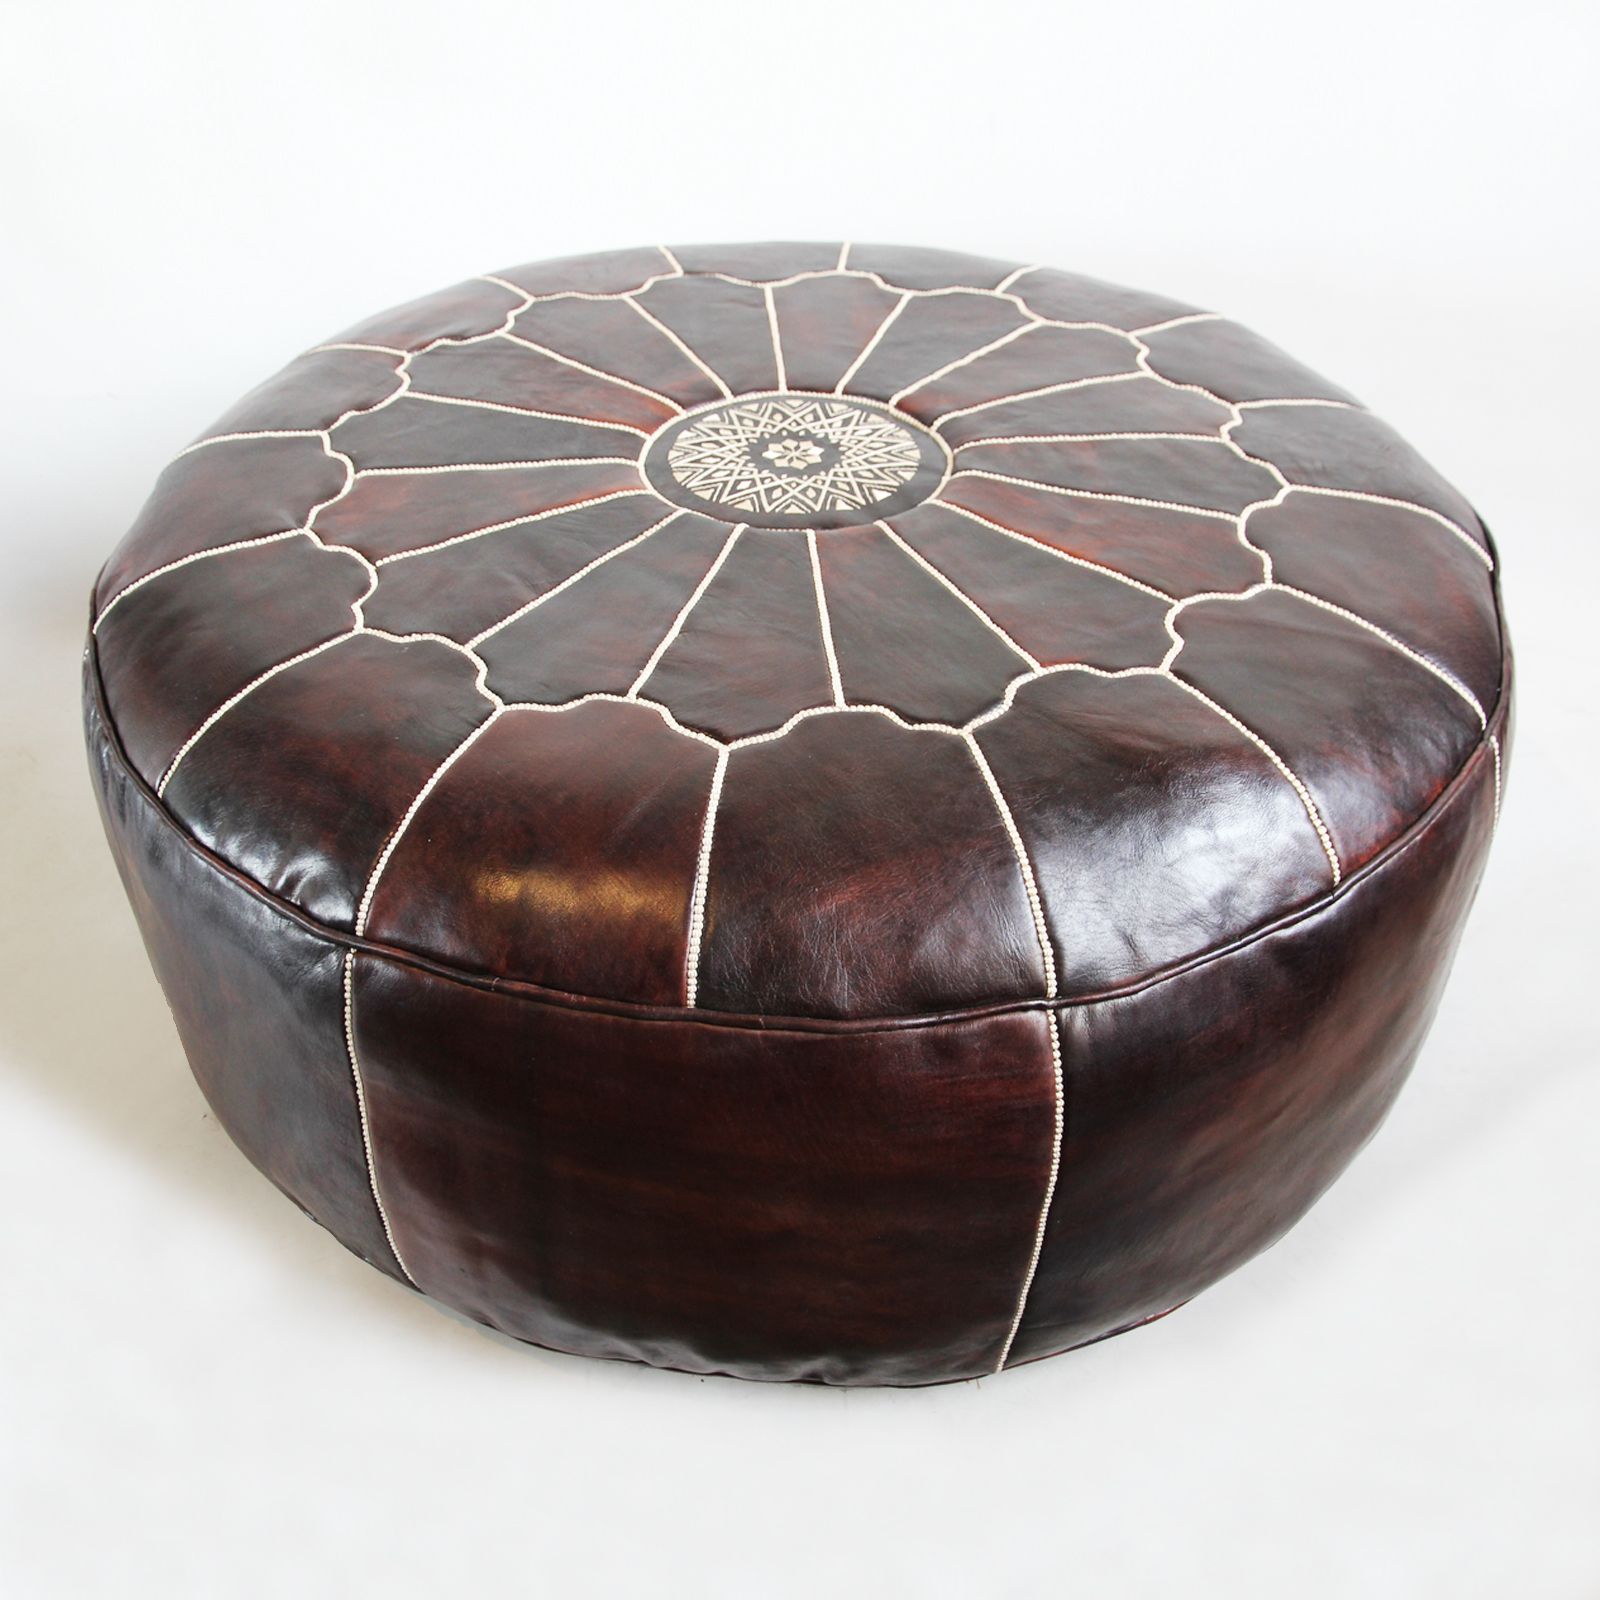 Large Leather Moroccan Ottoman Furniture | Design Mix Gallery Intended For Leather Pouf Ottomans (View 1 of 20)